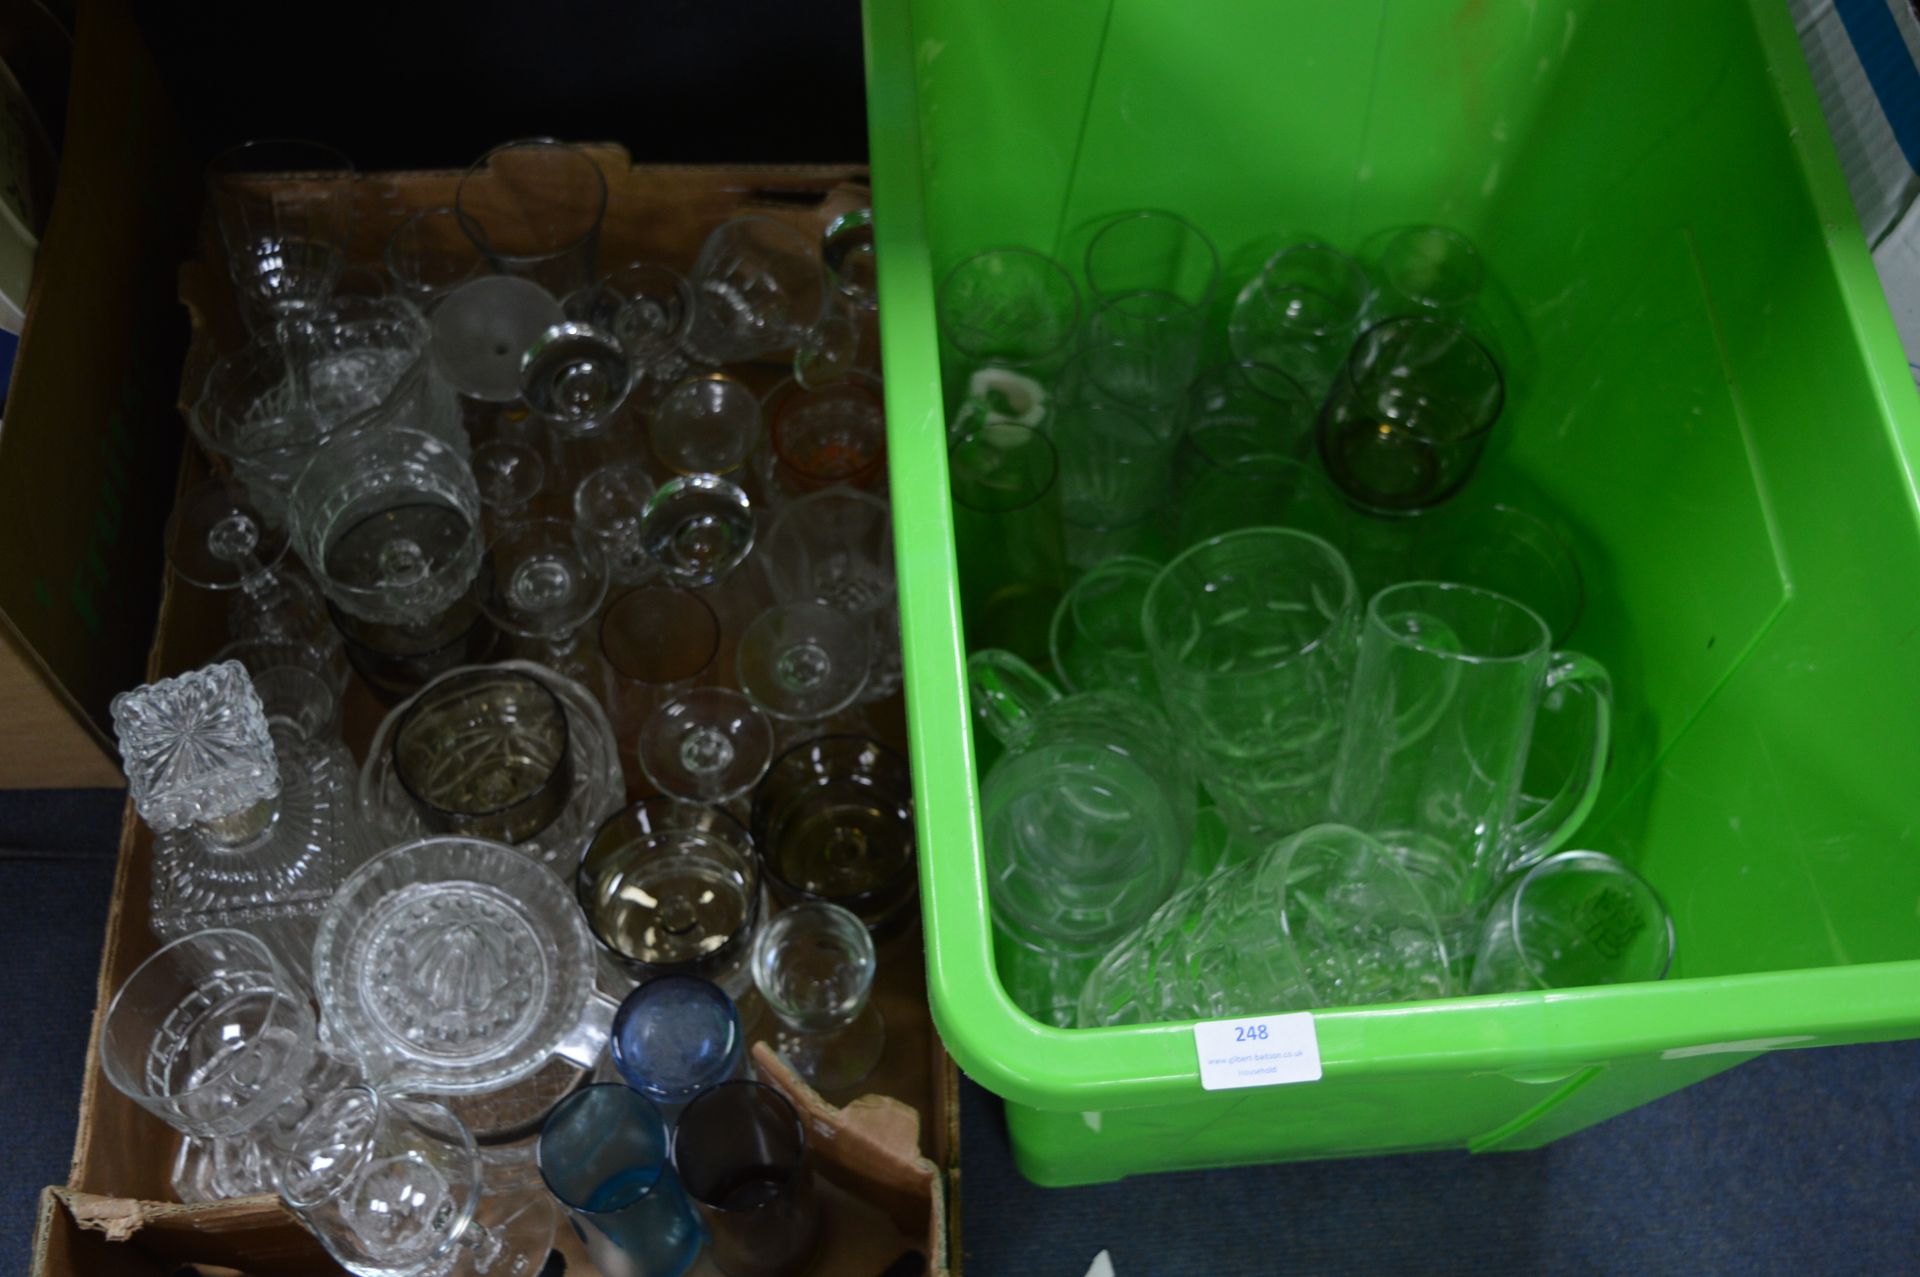 Two Boxes of Glassware